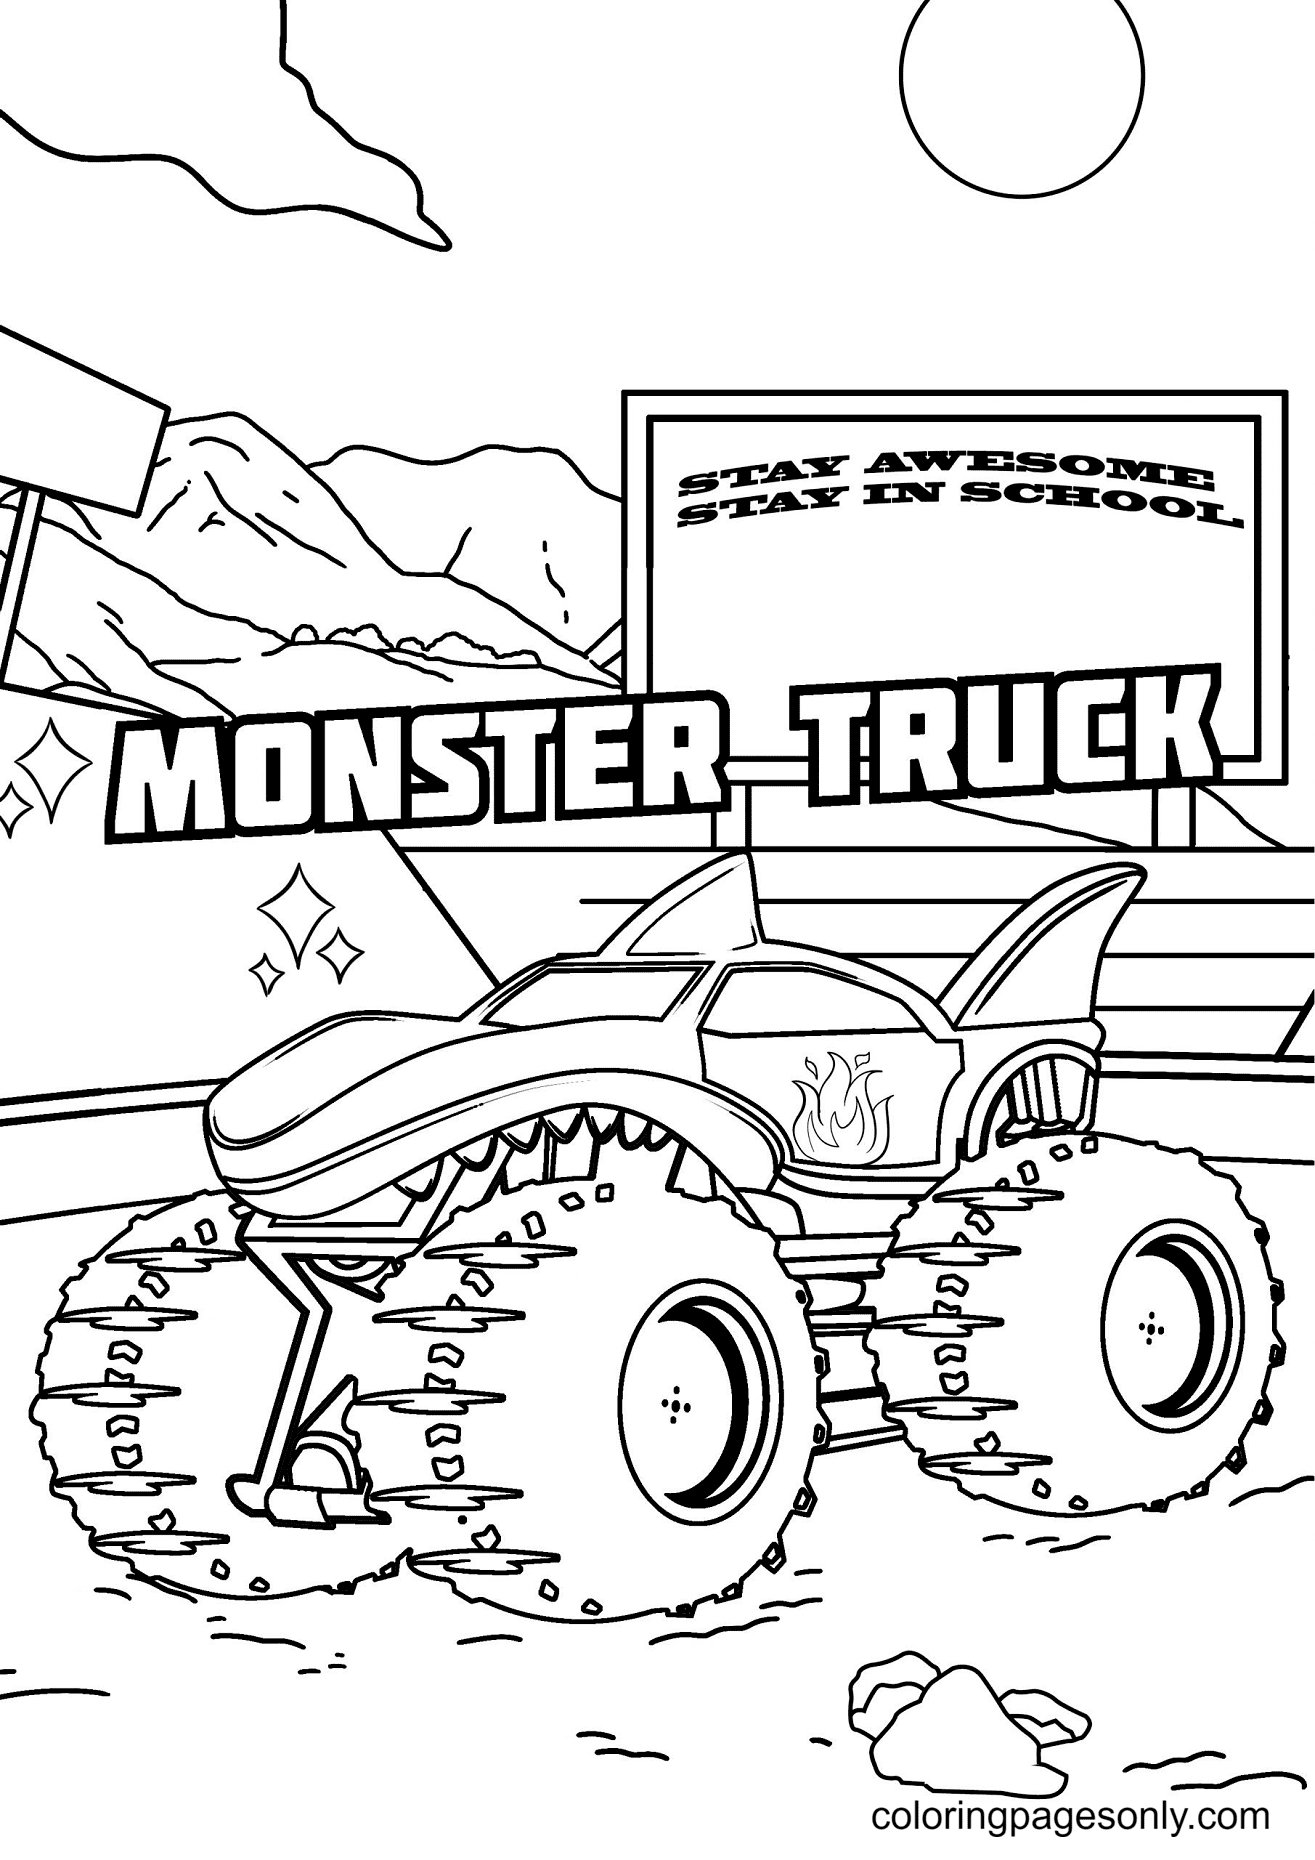 Printable Free Monster Truck Coloring Page